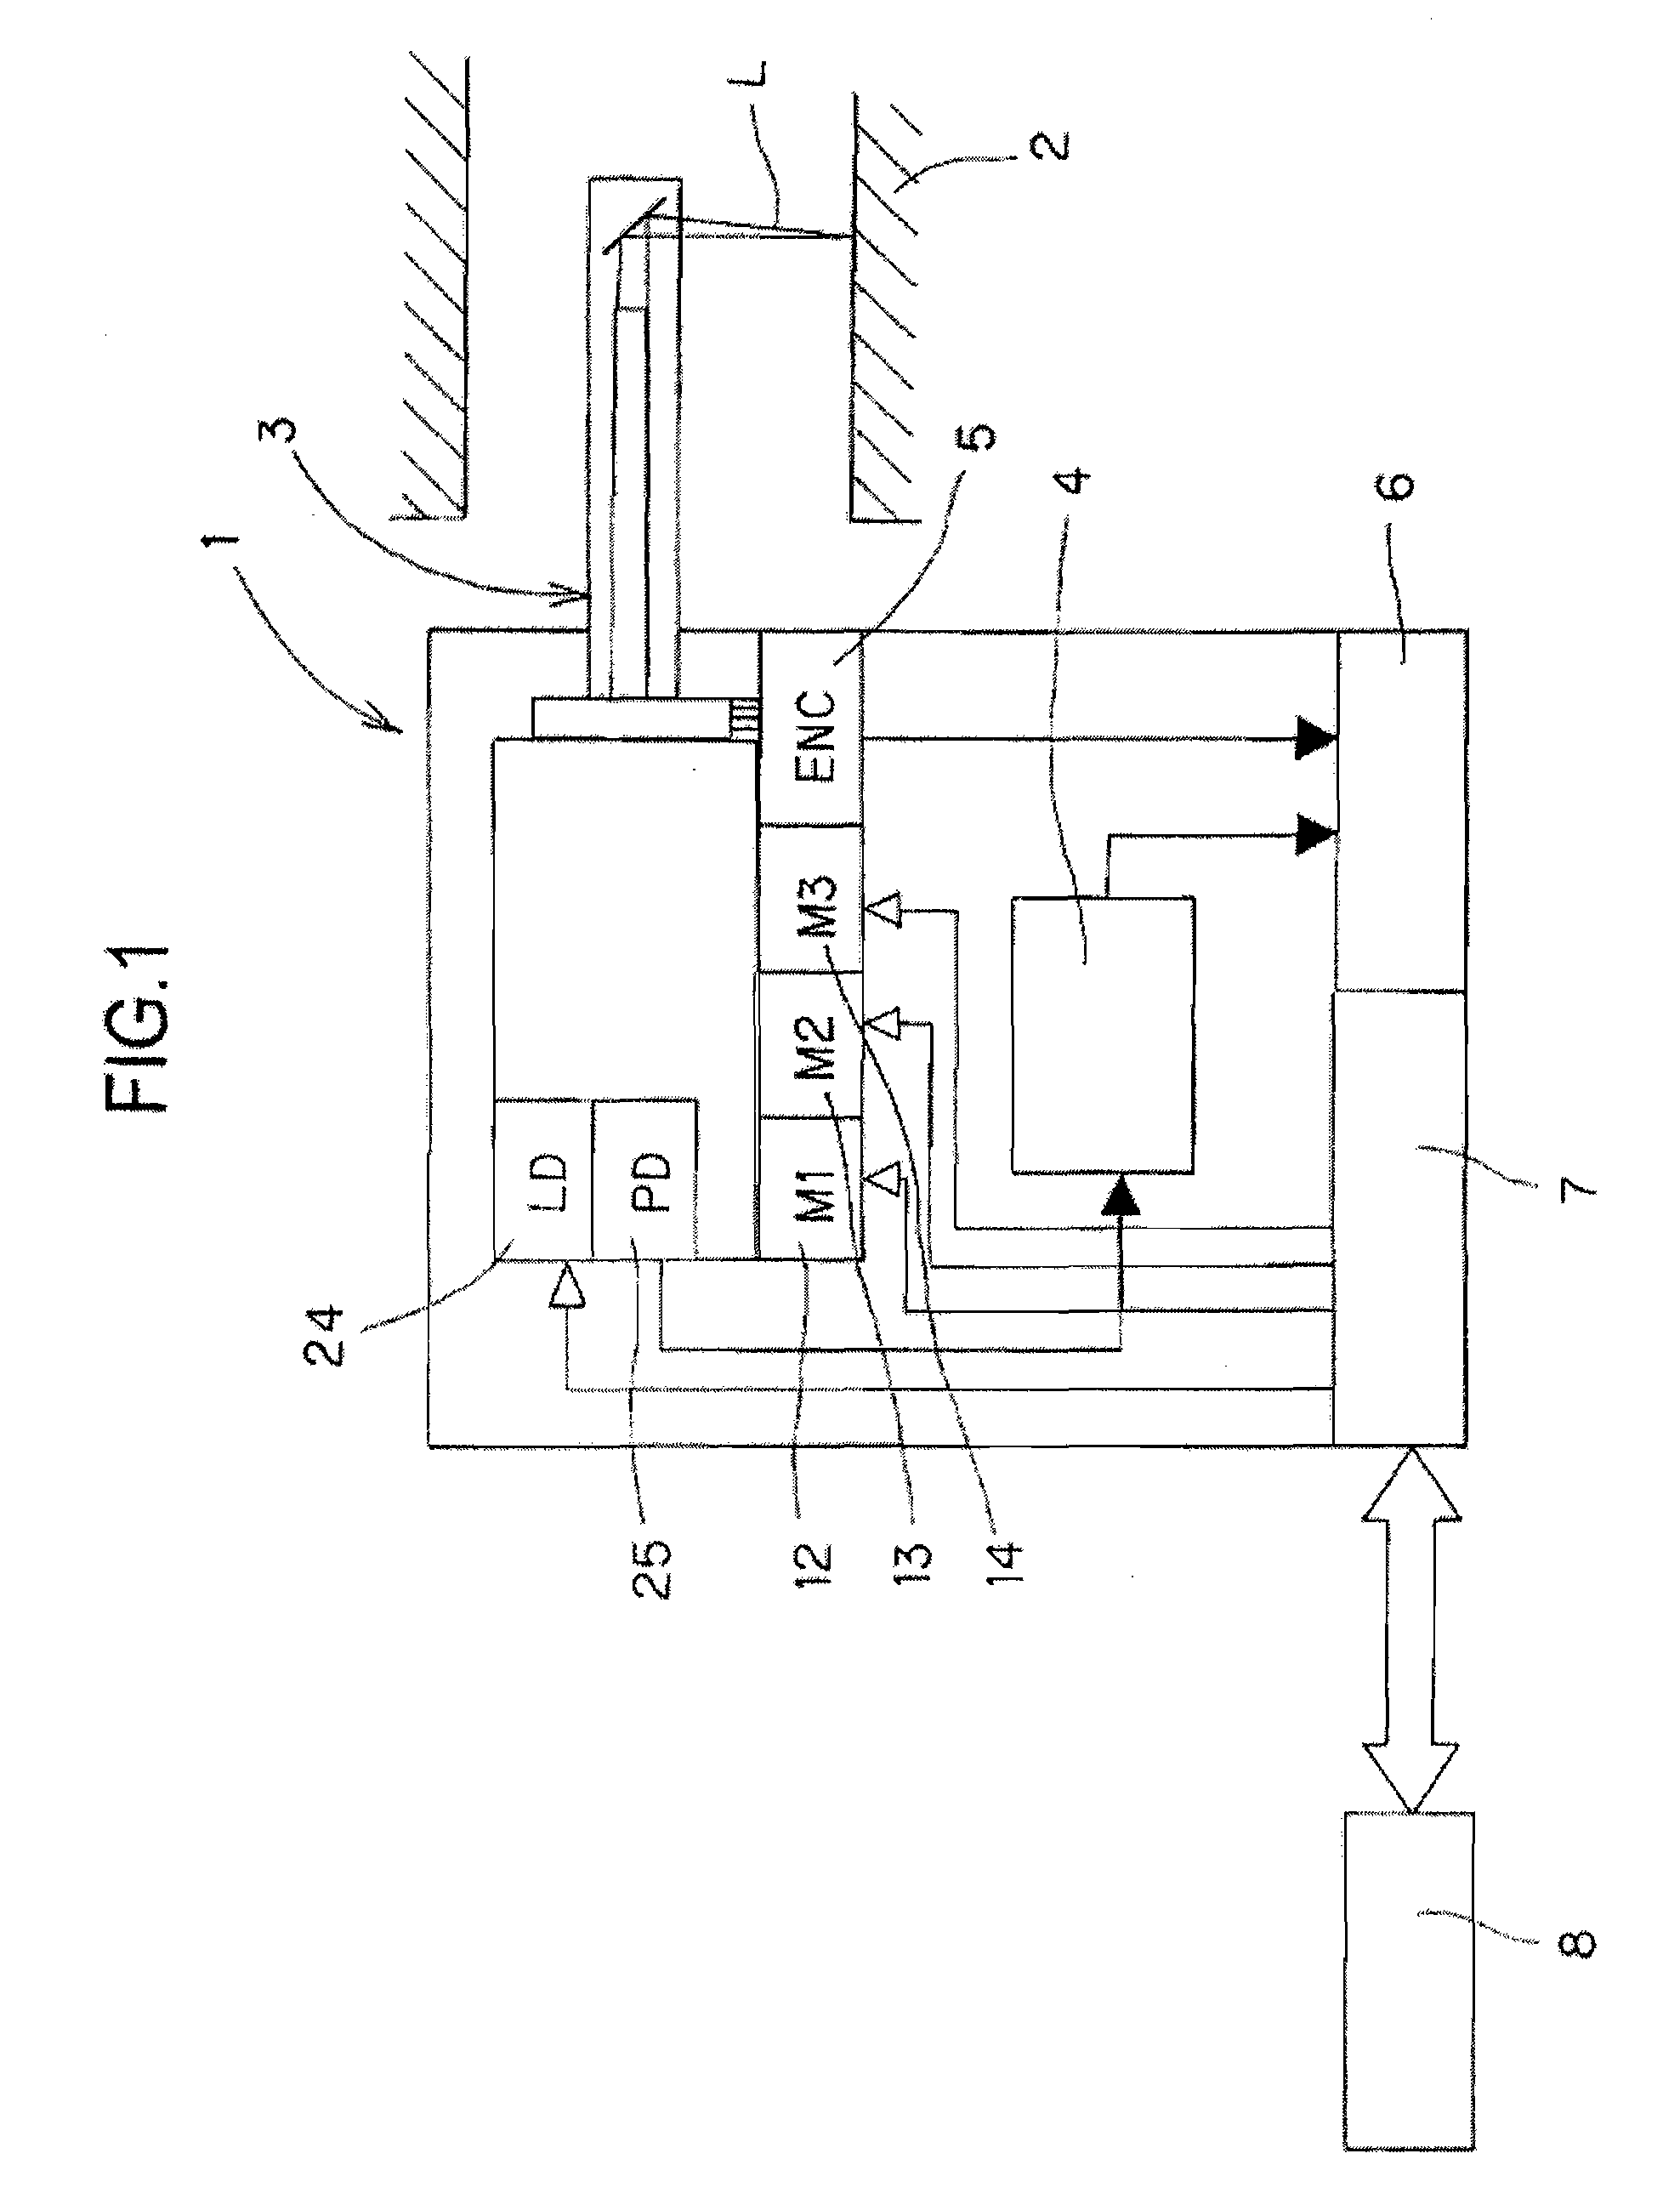 Surface inspection apparatus